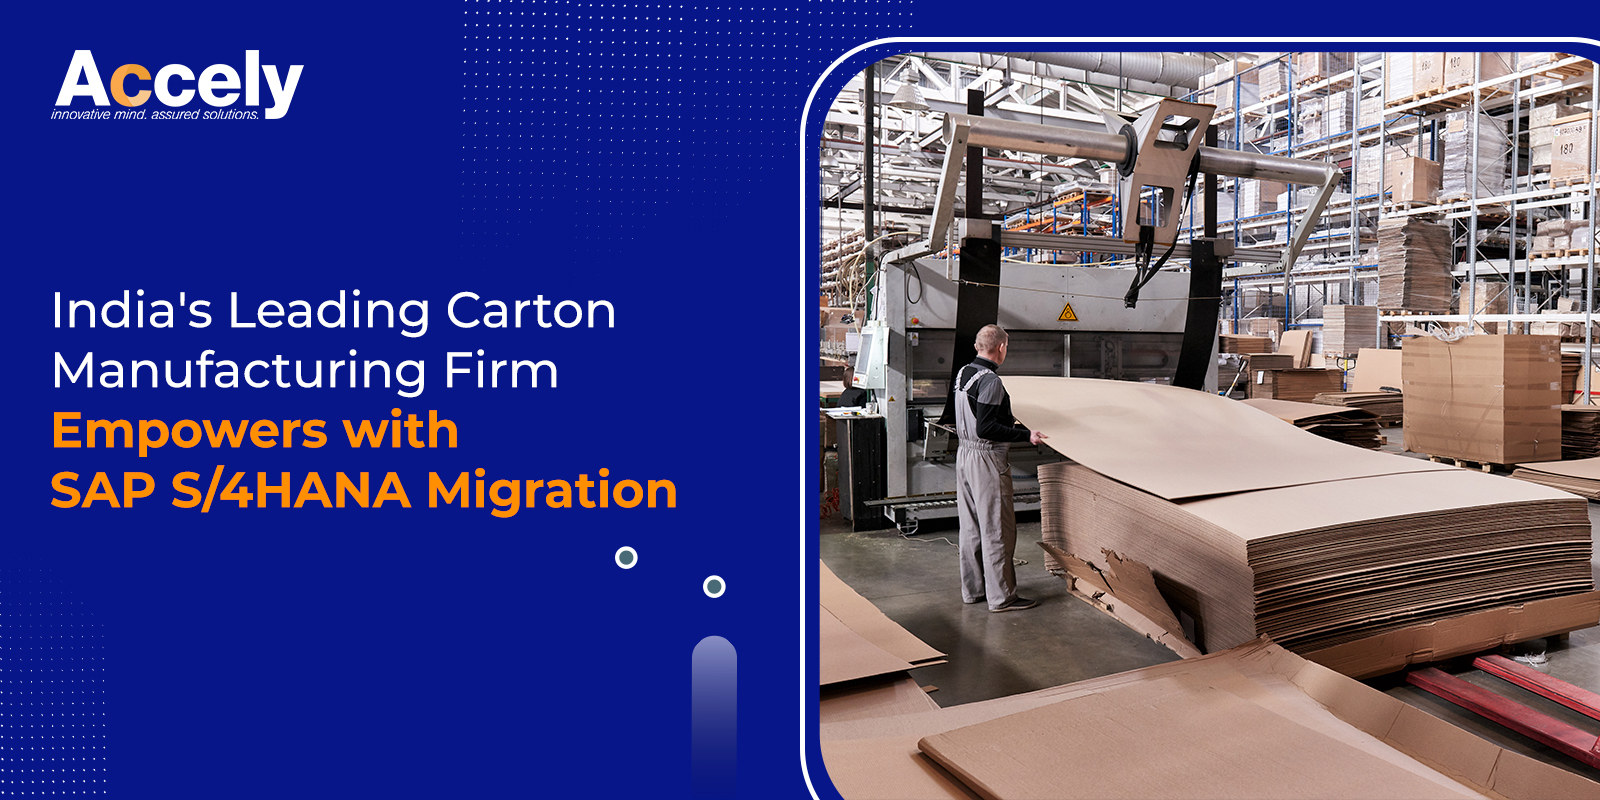 India's Leading Carton Manufacturing Firm Empowers with SAP S/4HANA Migration